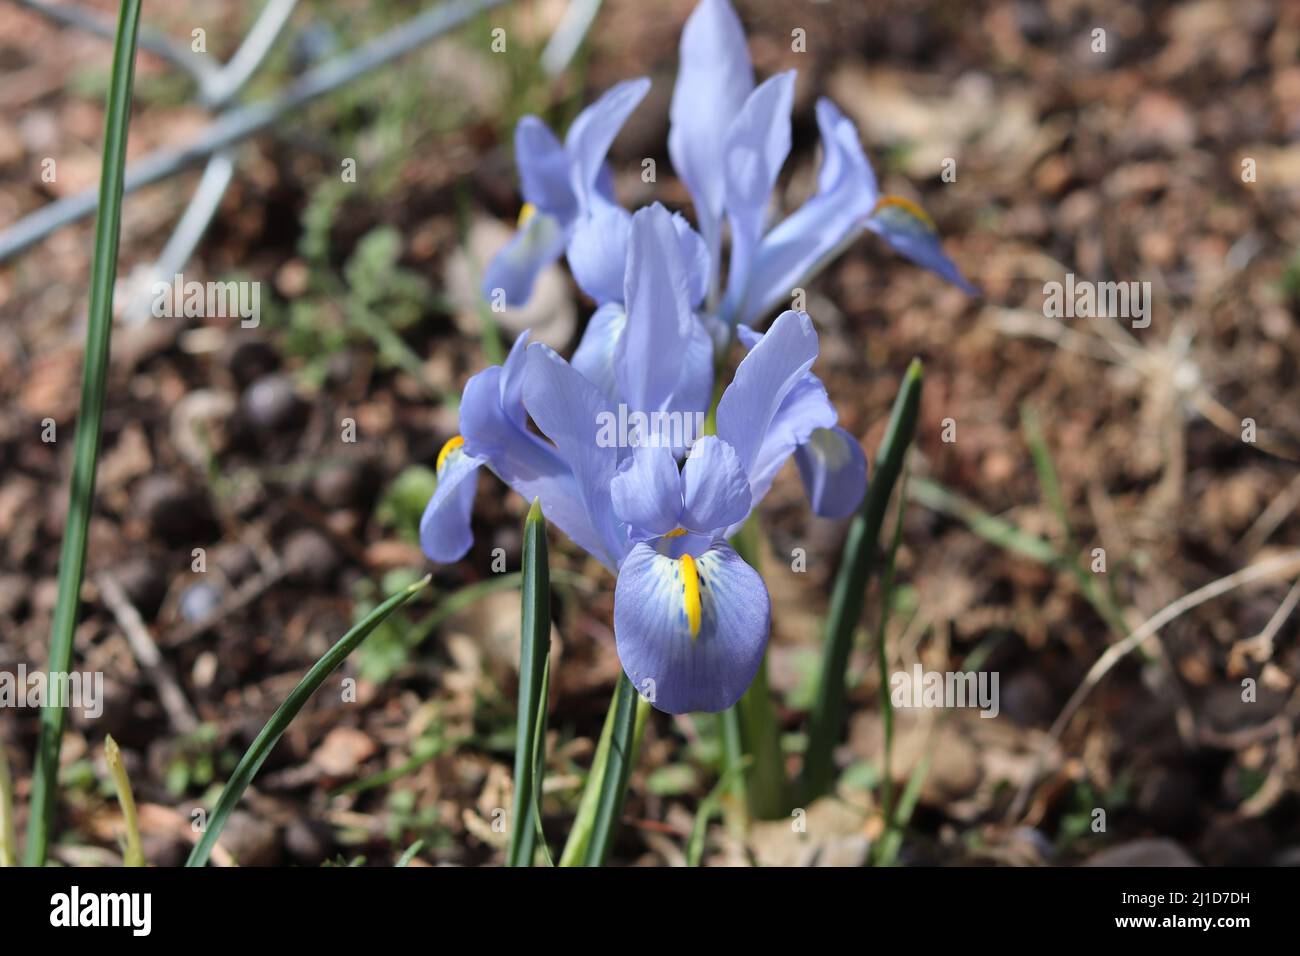 Close up of a blue dwarf iris or Iris reticulata from a garden in Payson, Arizona. Stock Photo